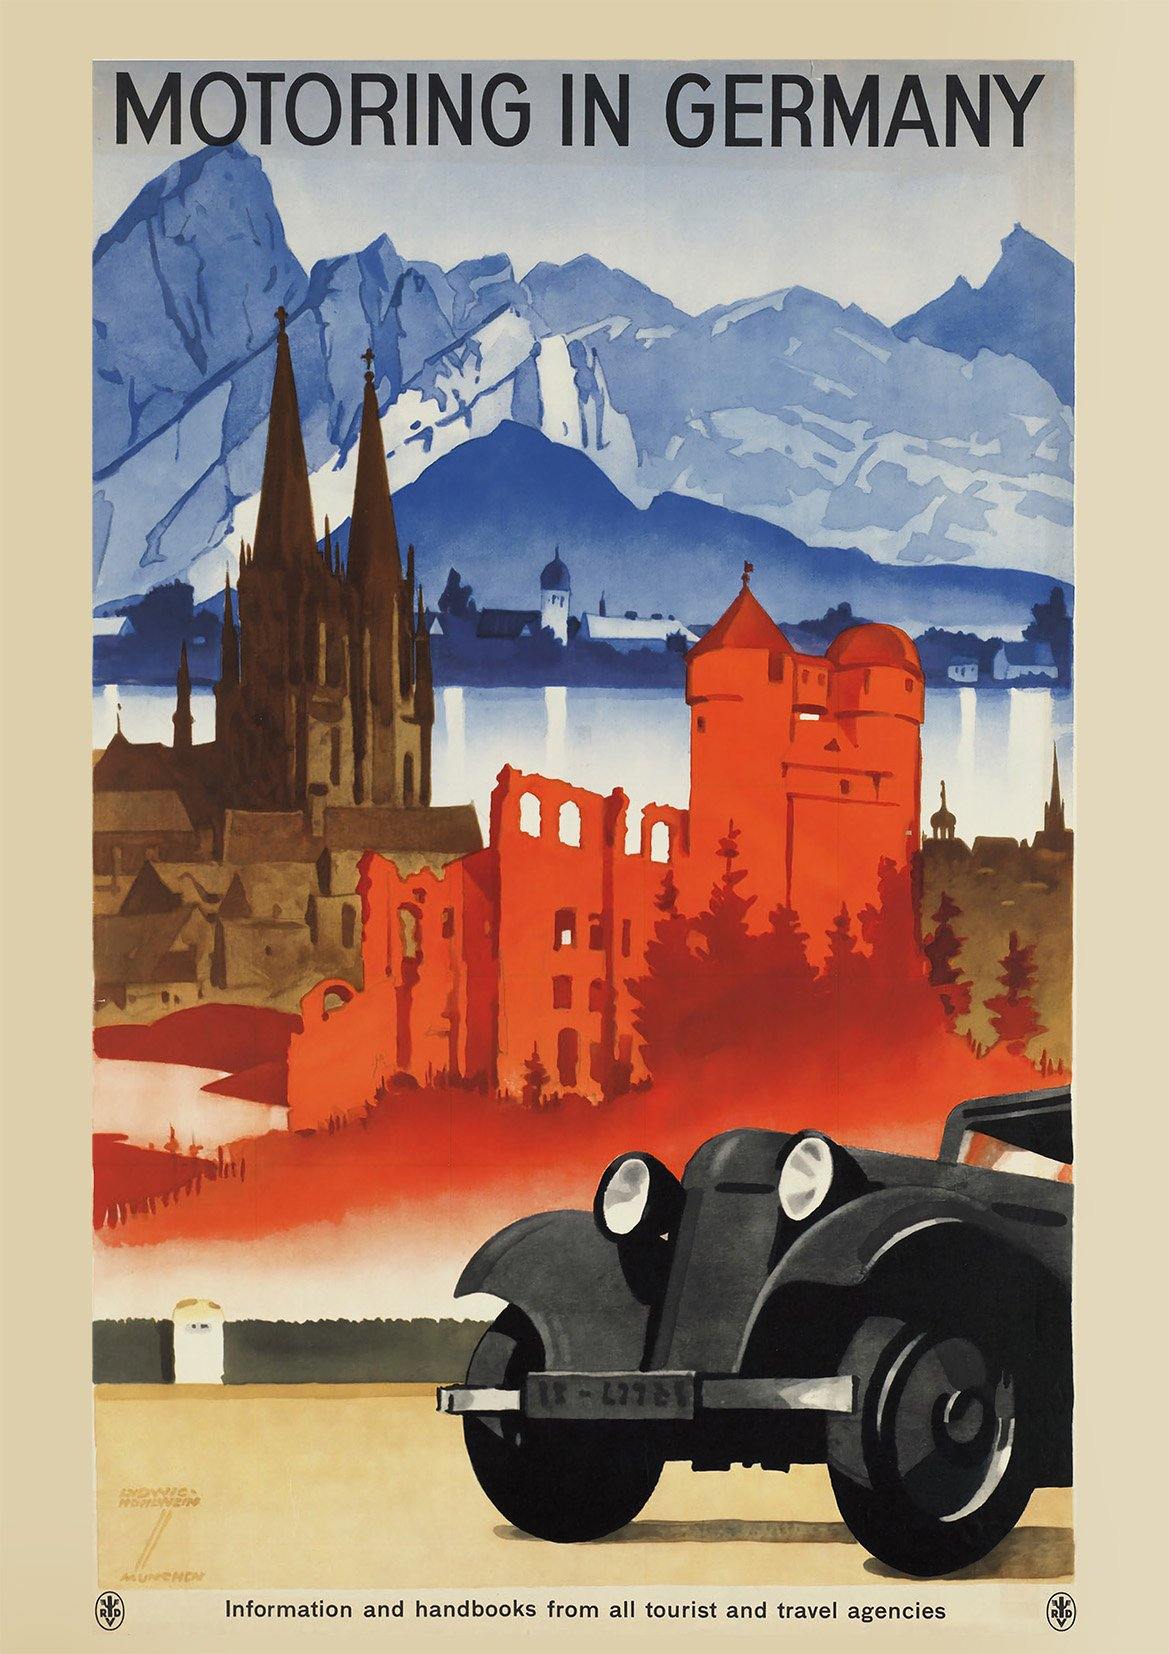 GERMANY TRAVEL POSTER: Motoring in Germany Vintage Tourism Advert - Pimlico Prints